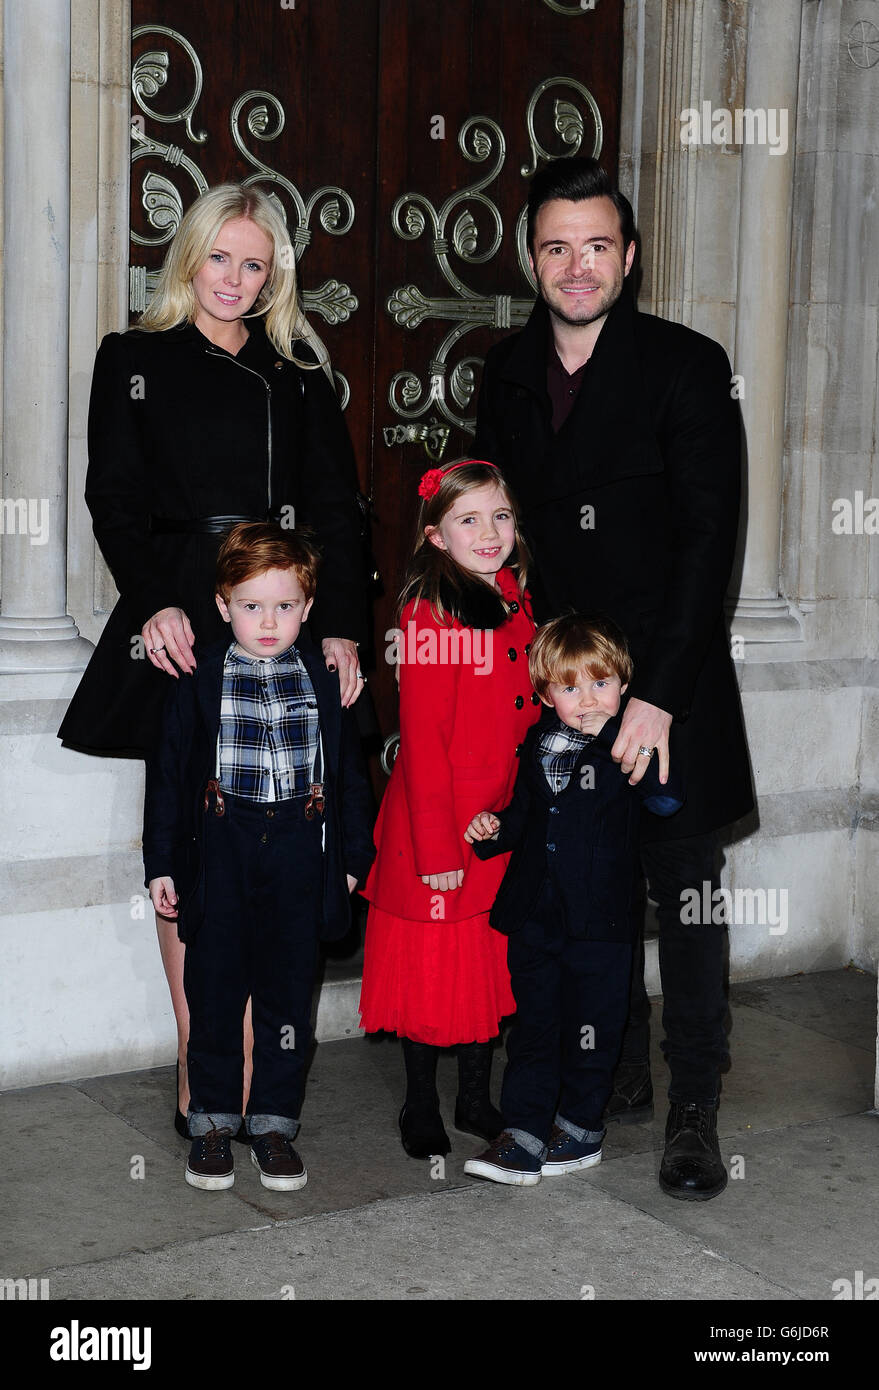 Shane Filan and his family attend the Decca Christmas Carol Concert, in aid of Great Ormond Street Hospital, held at St. James Roman Catholic Church in London. Stock Photo